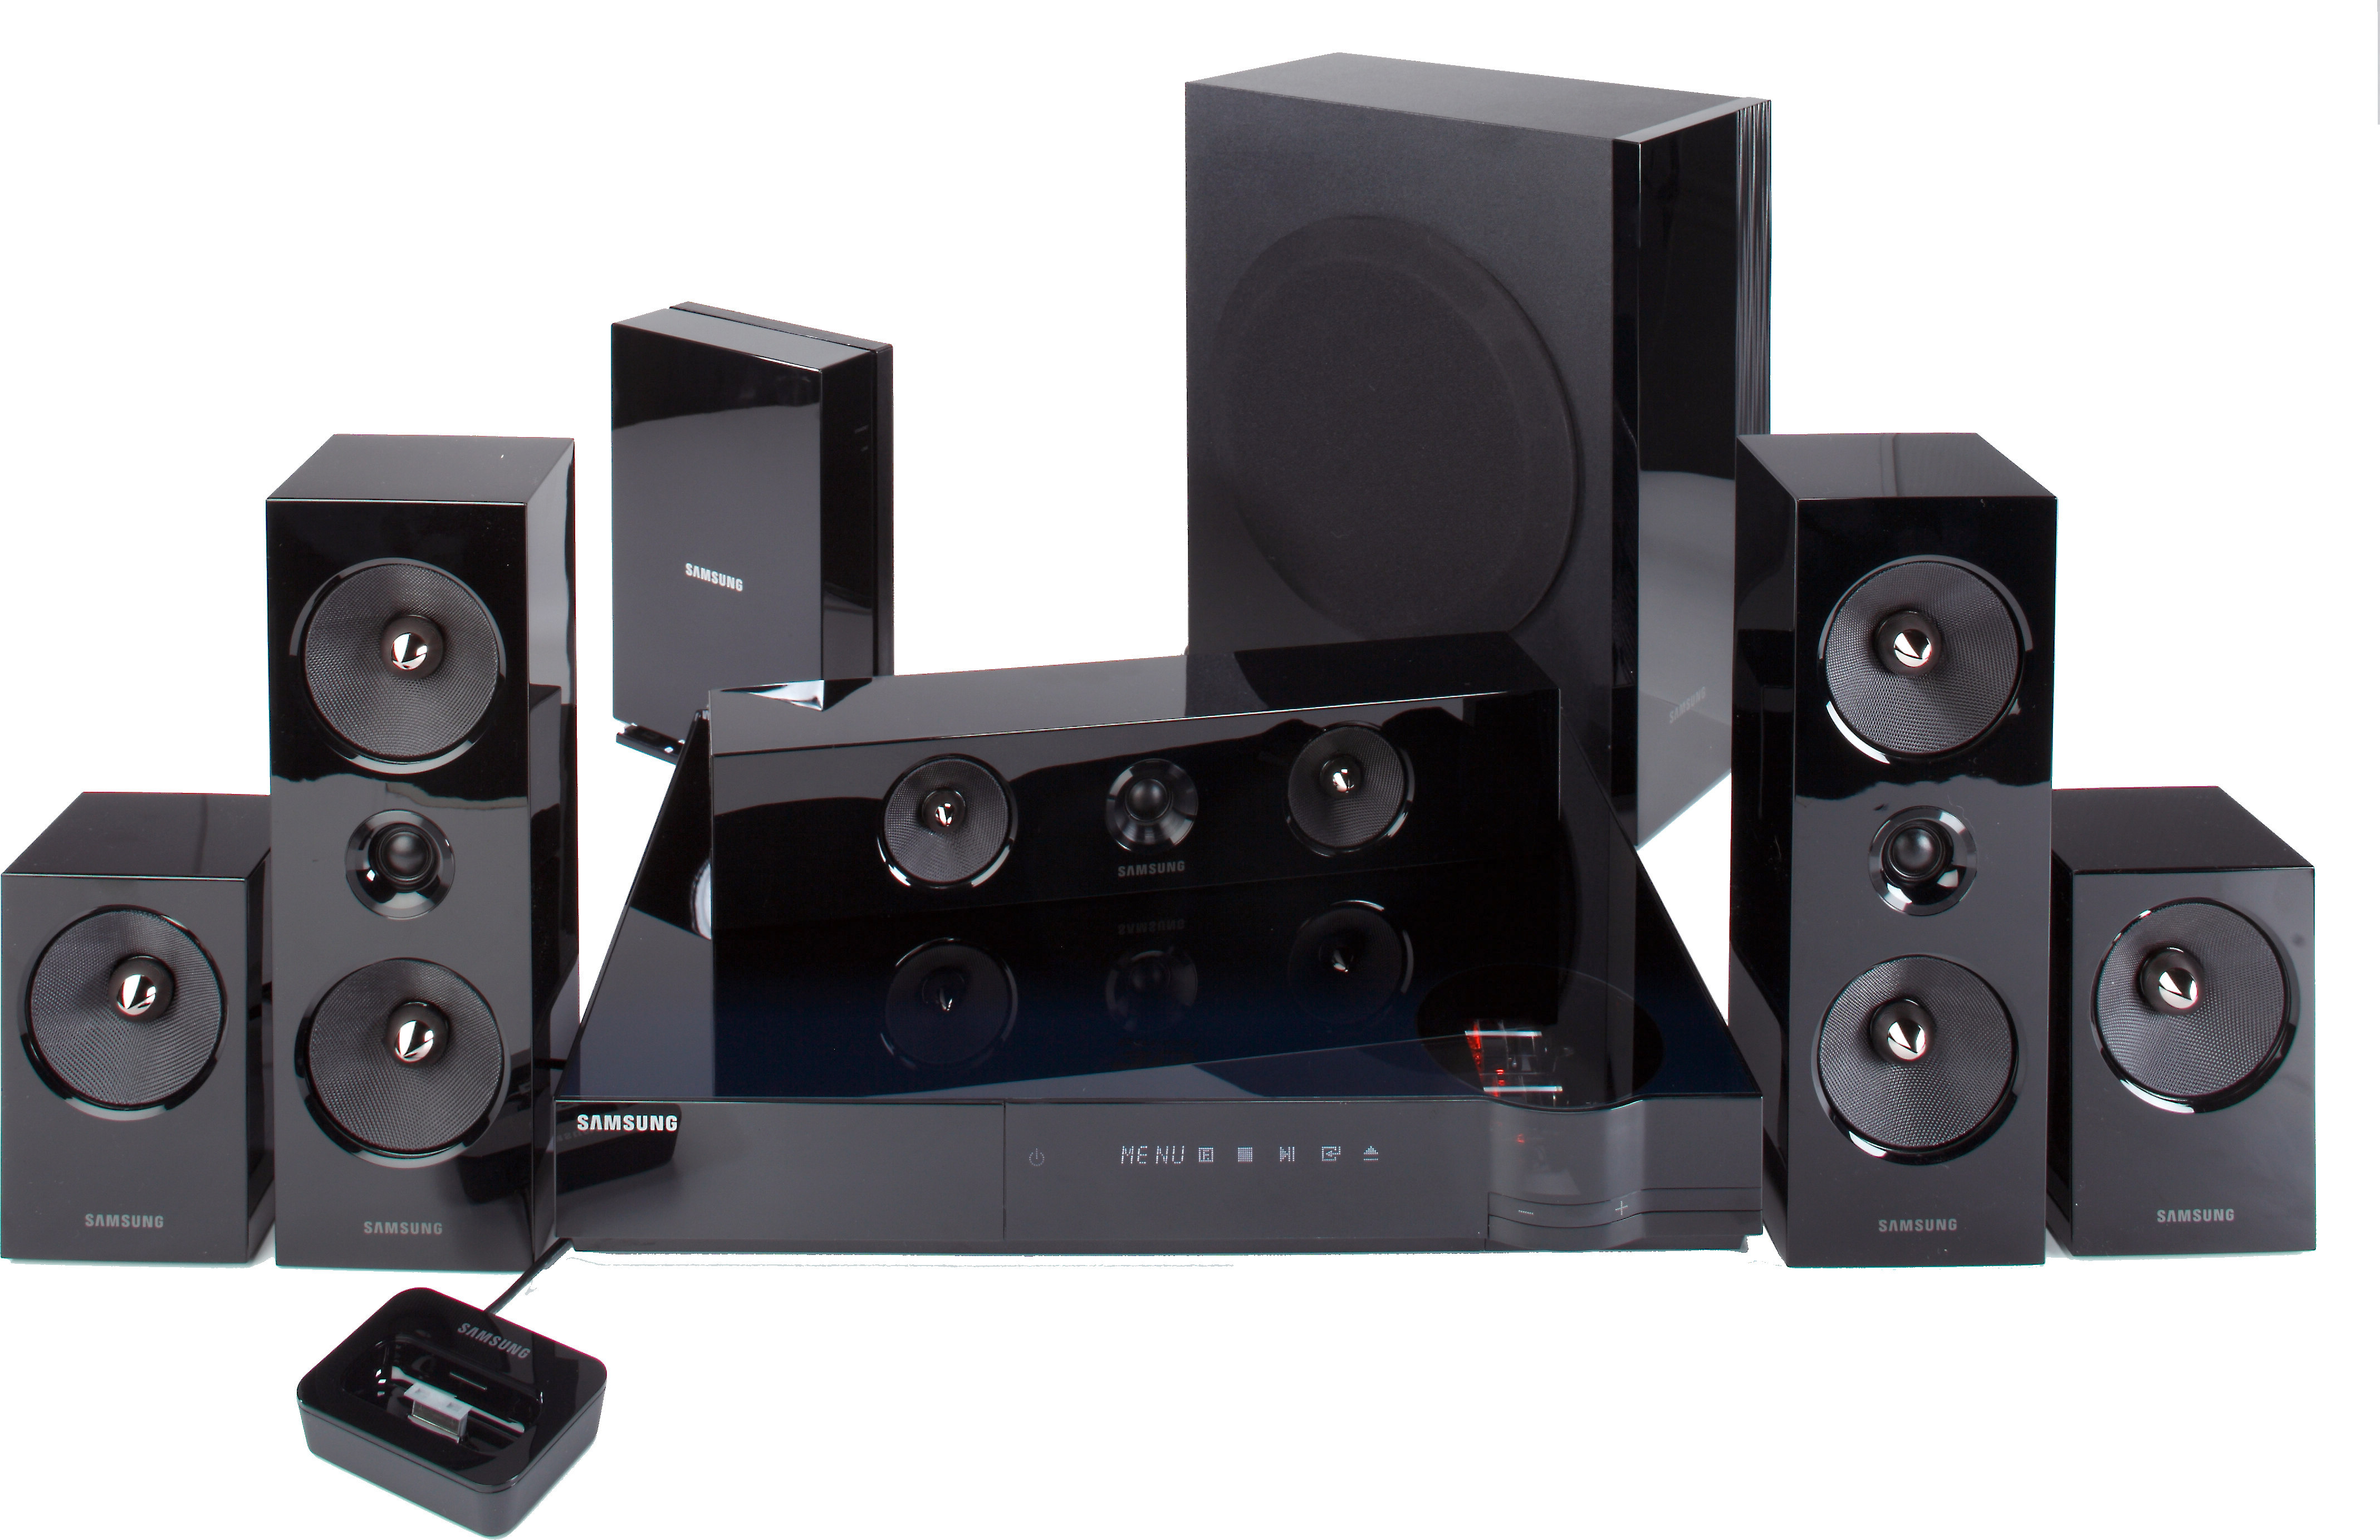 Samsung Ht E6500w 3d Ready Blu Ray 5 1 Home Theater System With Wi Fi And Wireless Rear Speakers At Crutchfield